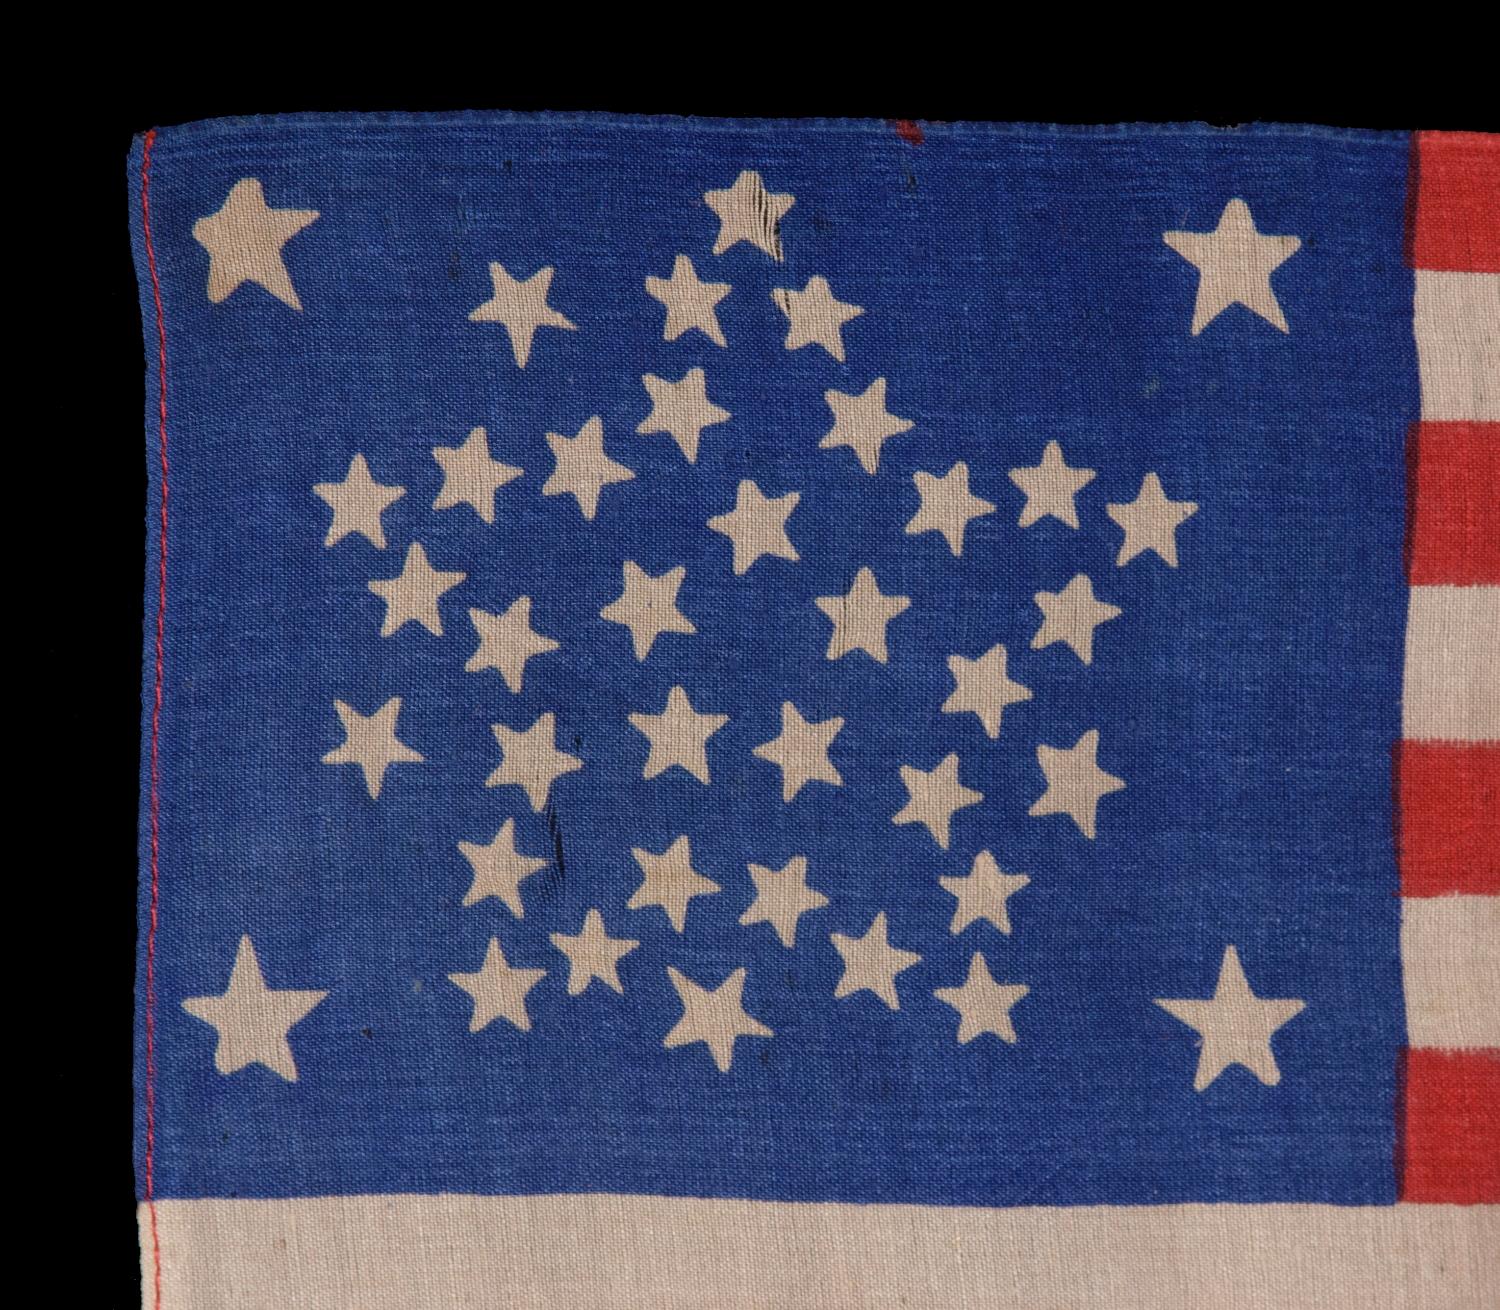 how are the stars arranged on the american flag